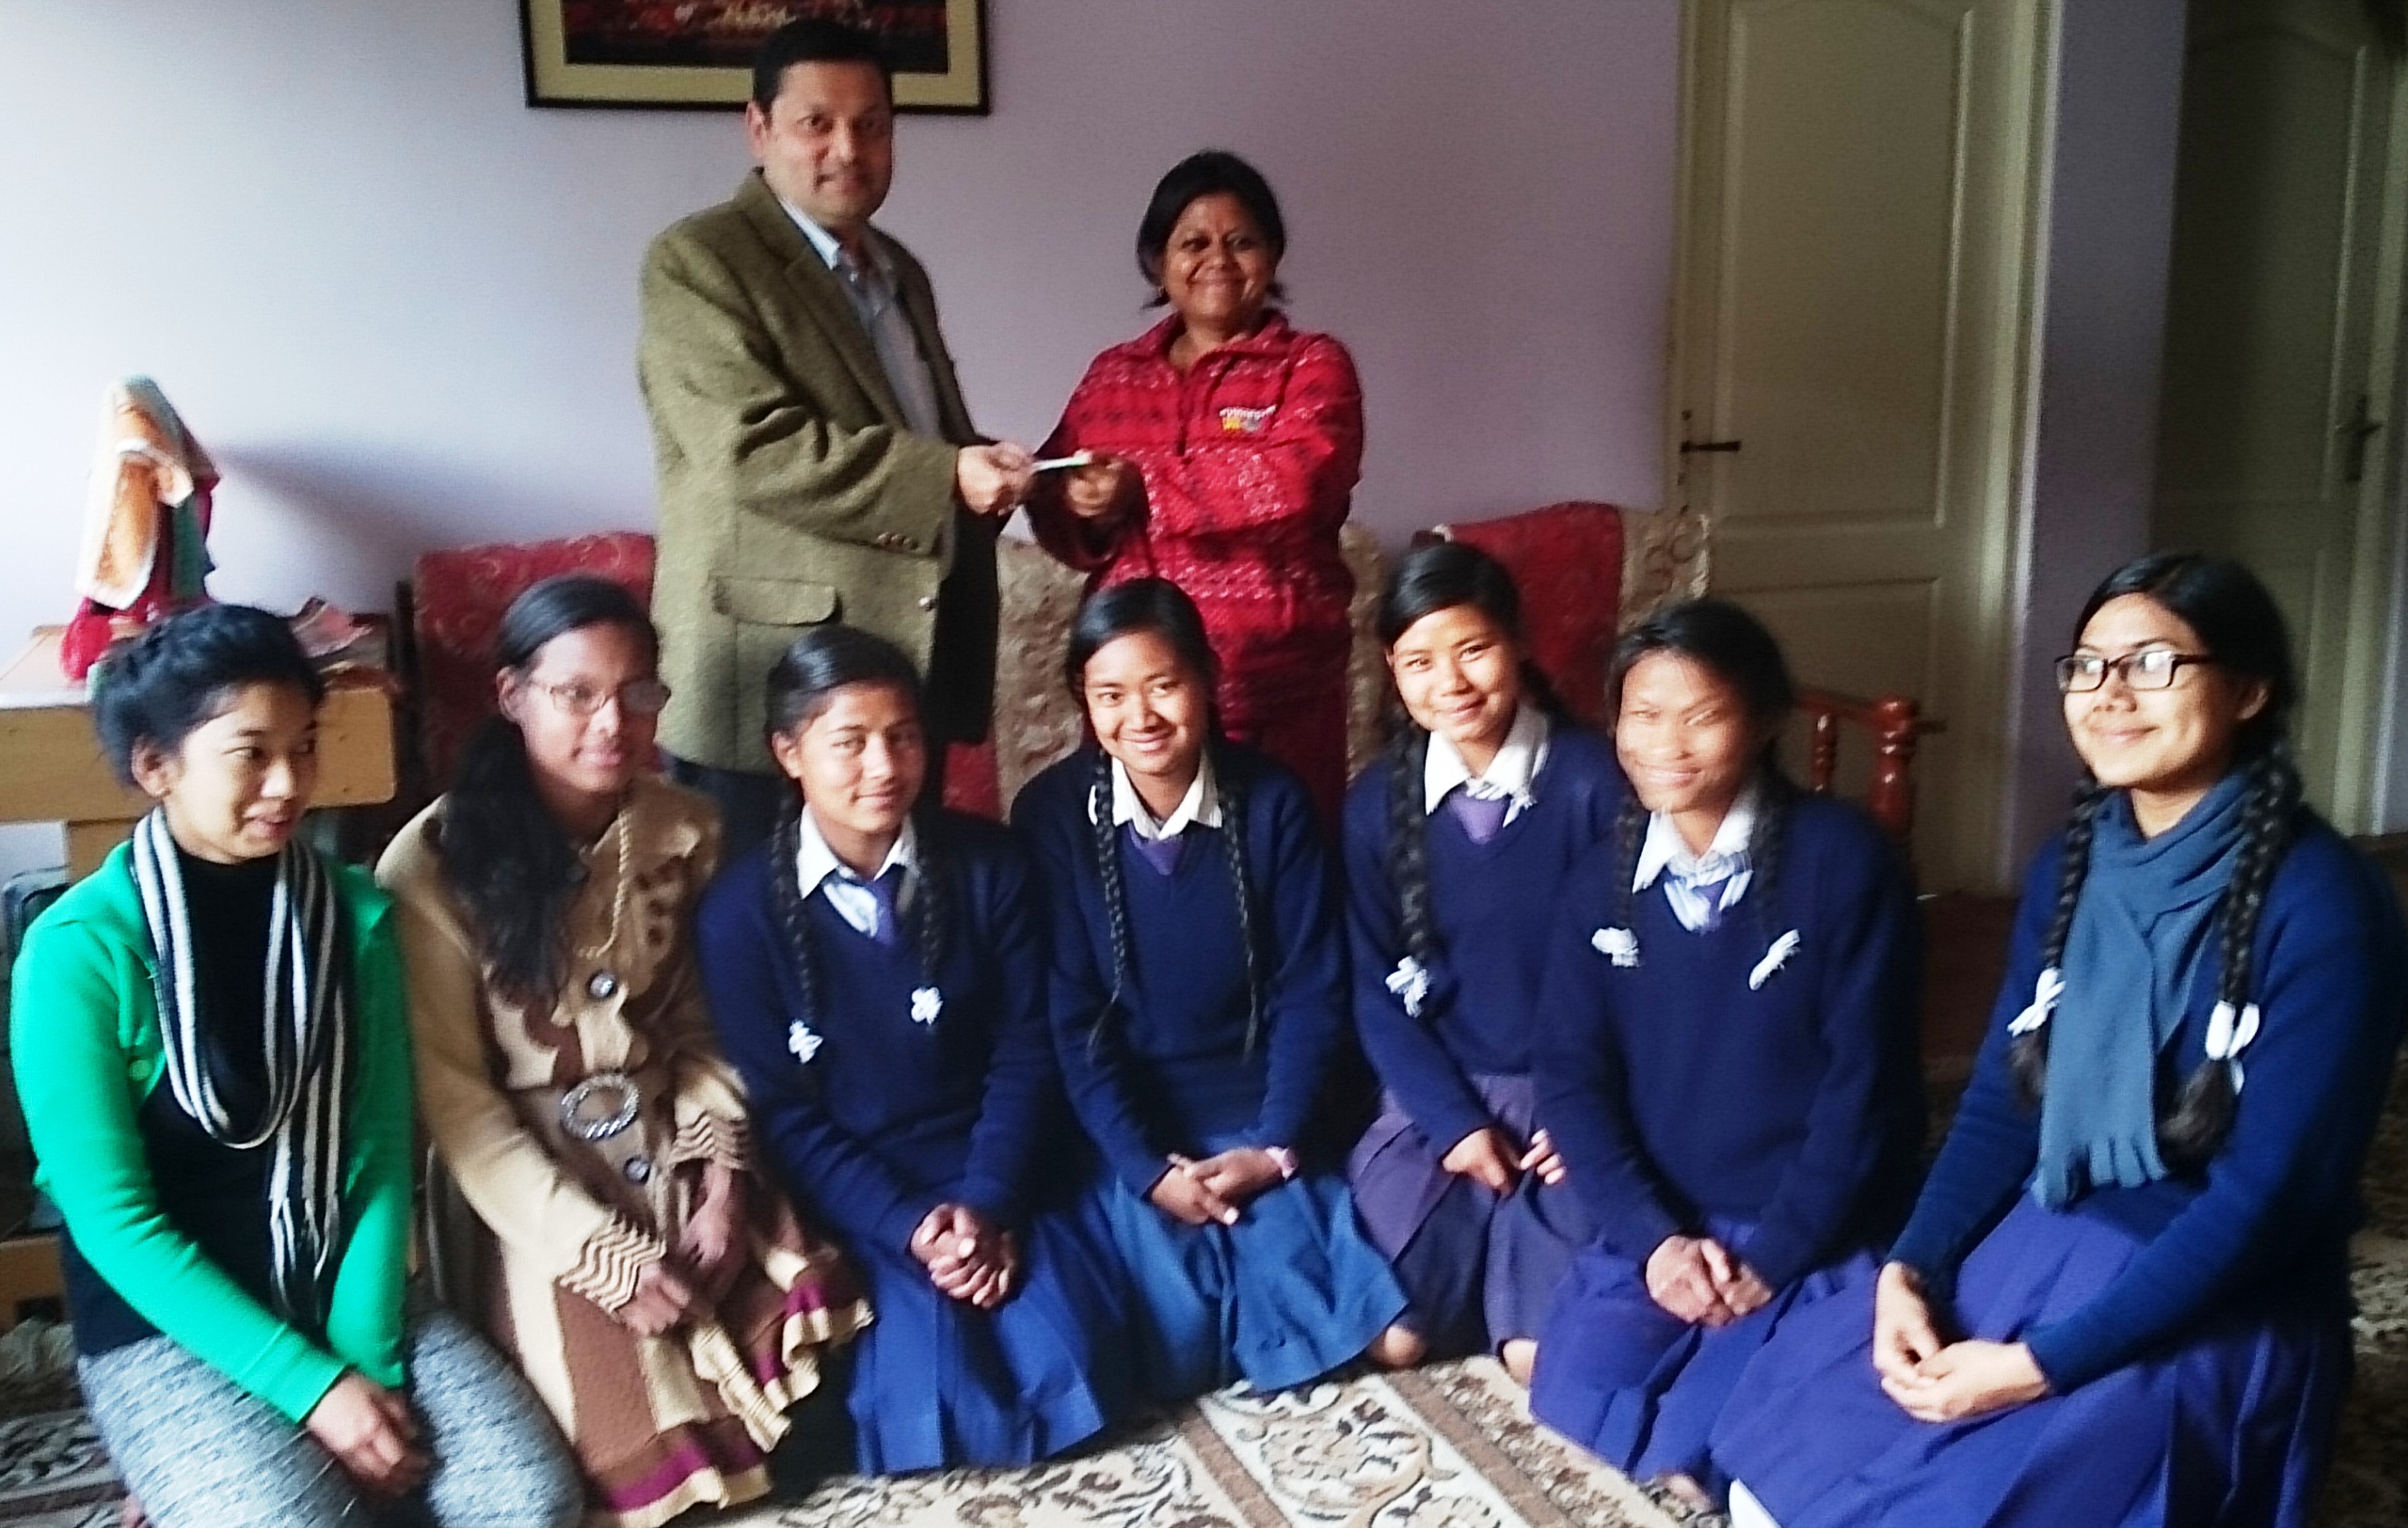 South Asia Foundation Nepal Chairperson Handing over Cheque of NPR 30,000 to Taal